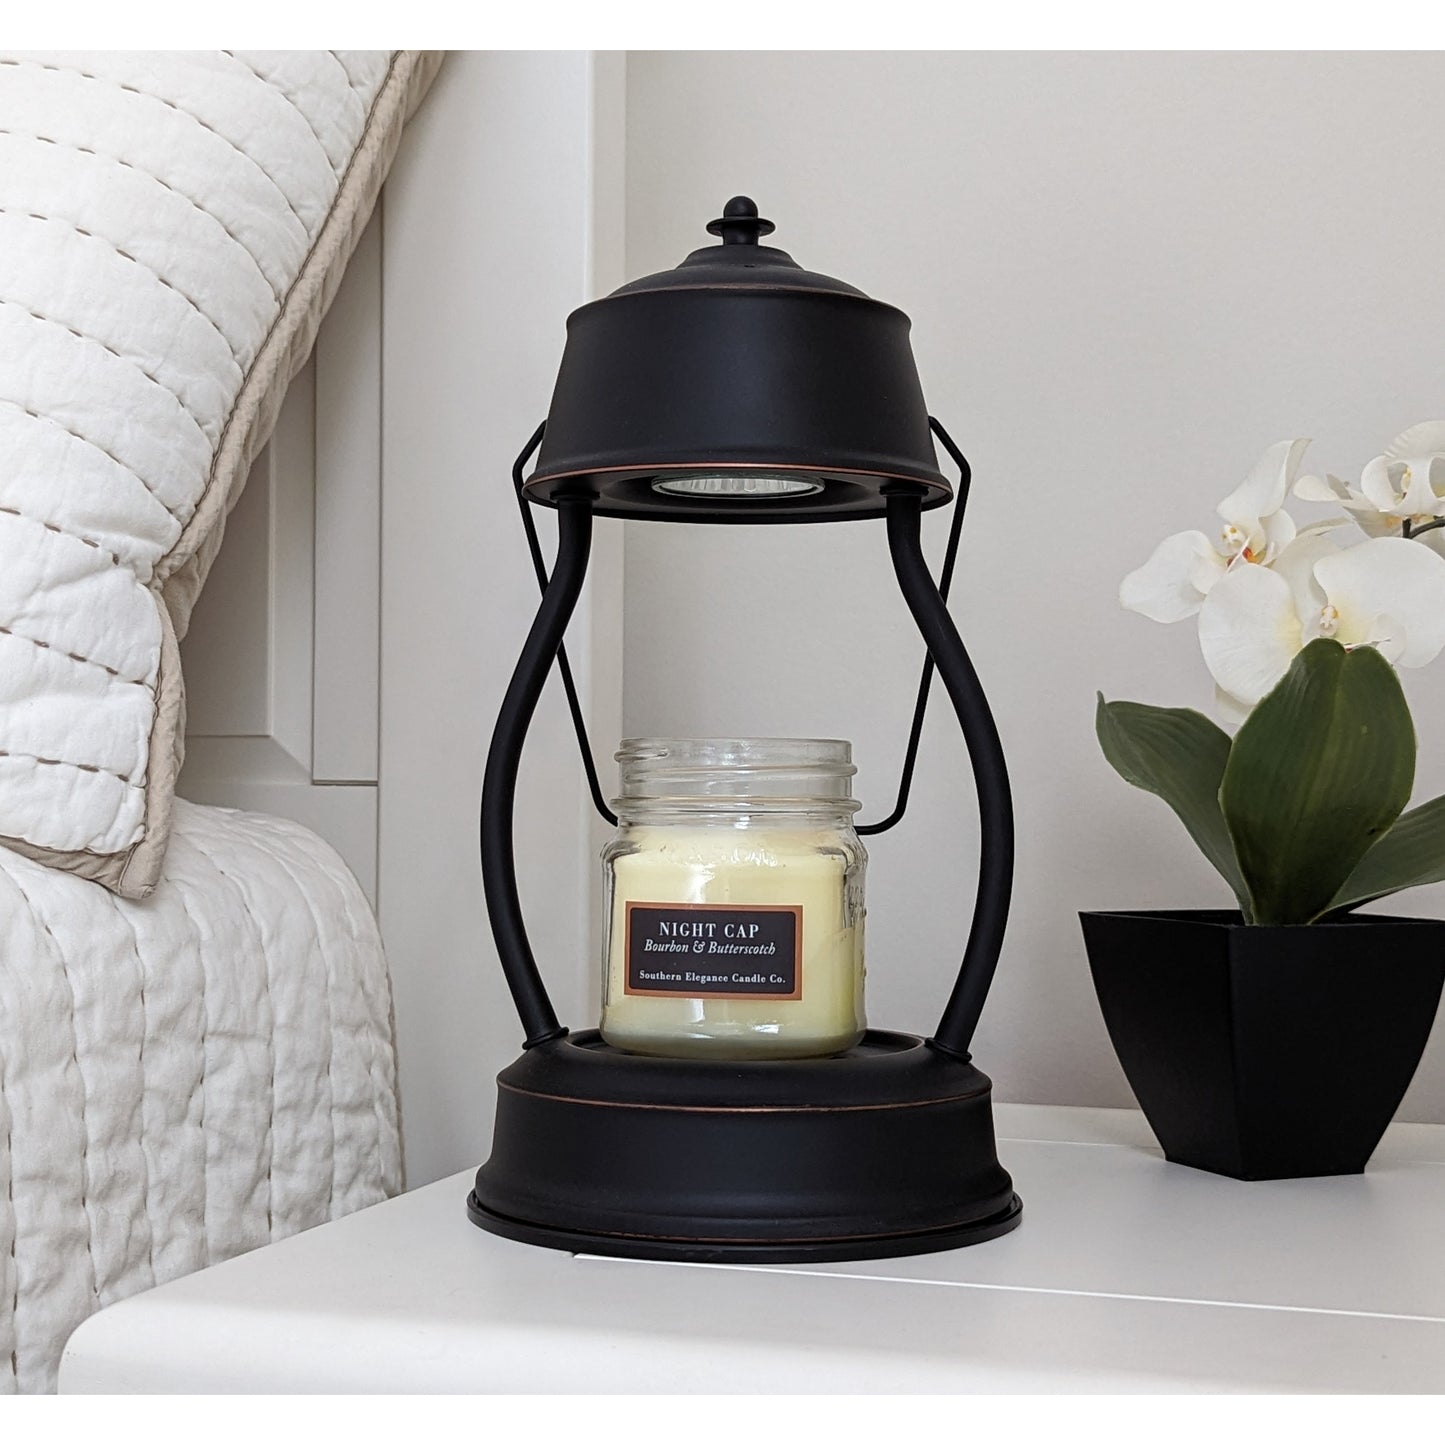 Image, unlit rubbed bronze candle warmer on a bedside table with small scented candle.